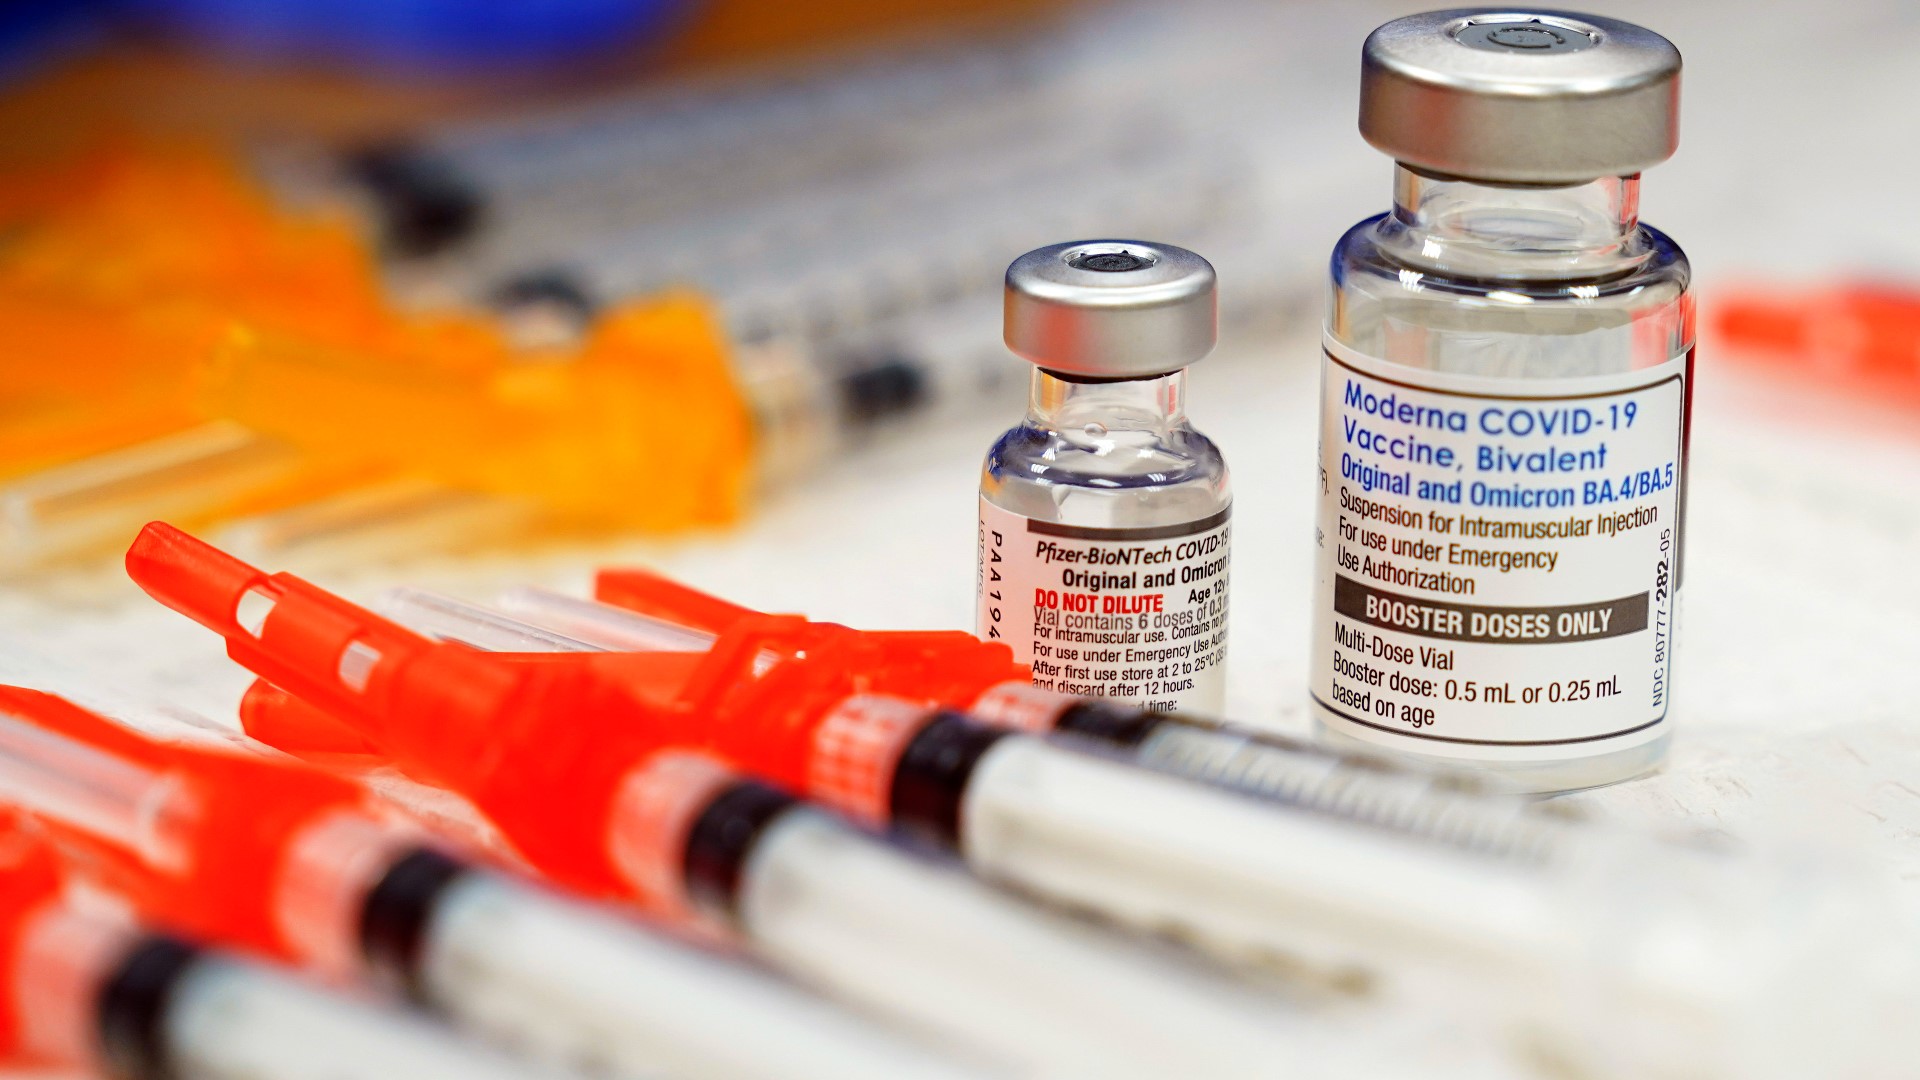 The federal COVID-19 public health emergency declaration expires on May 11. Here’s what you need to know about vaccines, testing, and whether the pandemic is over.